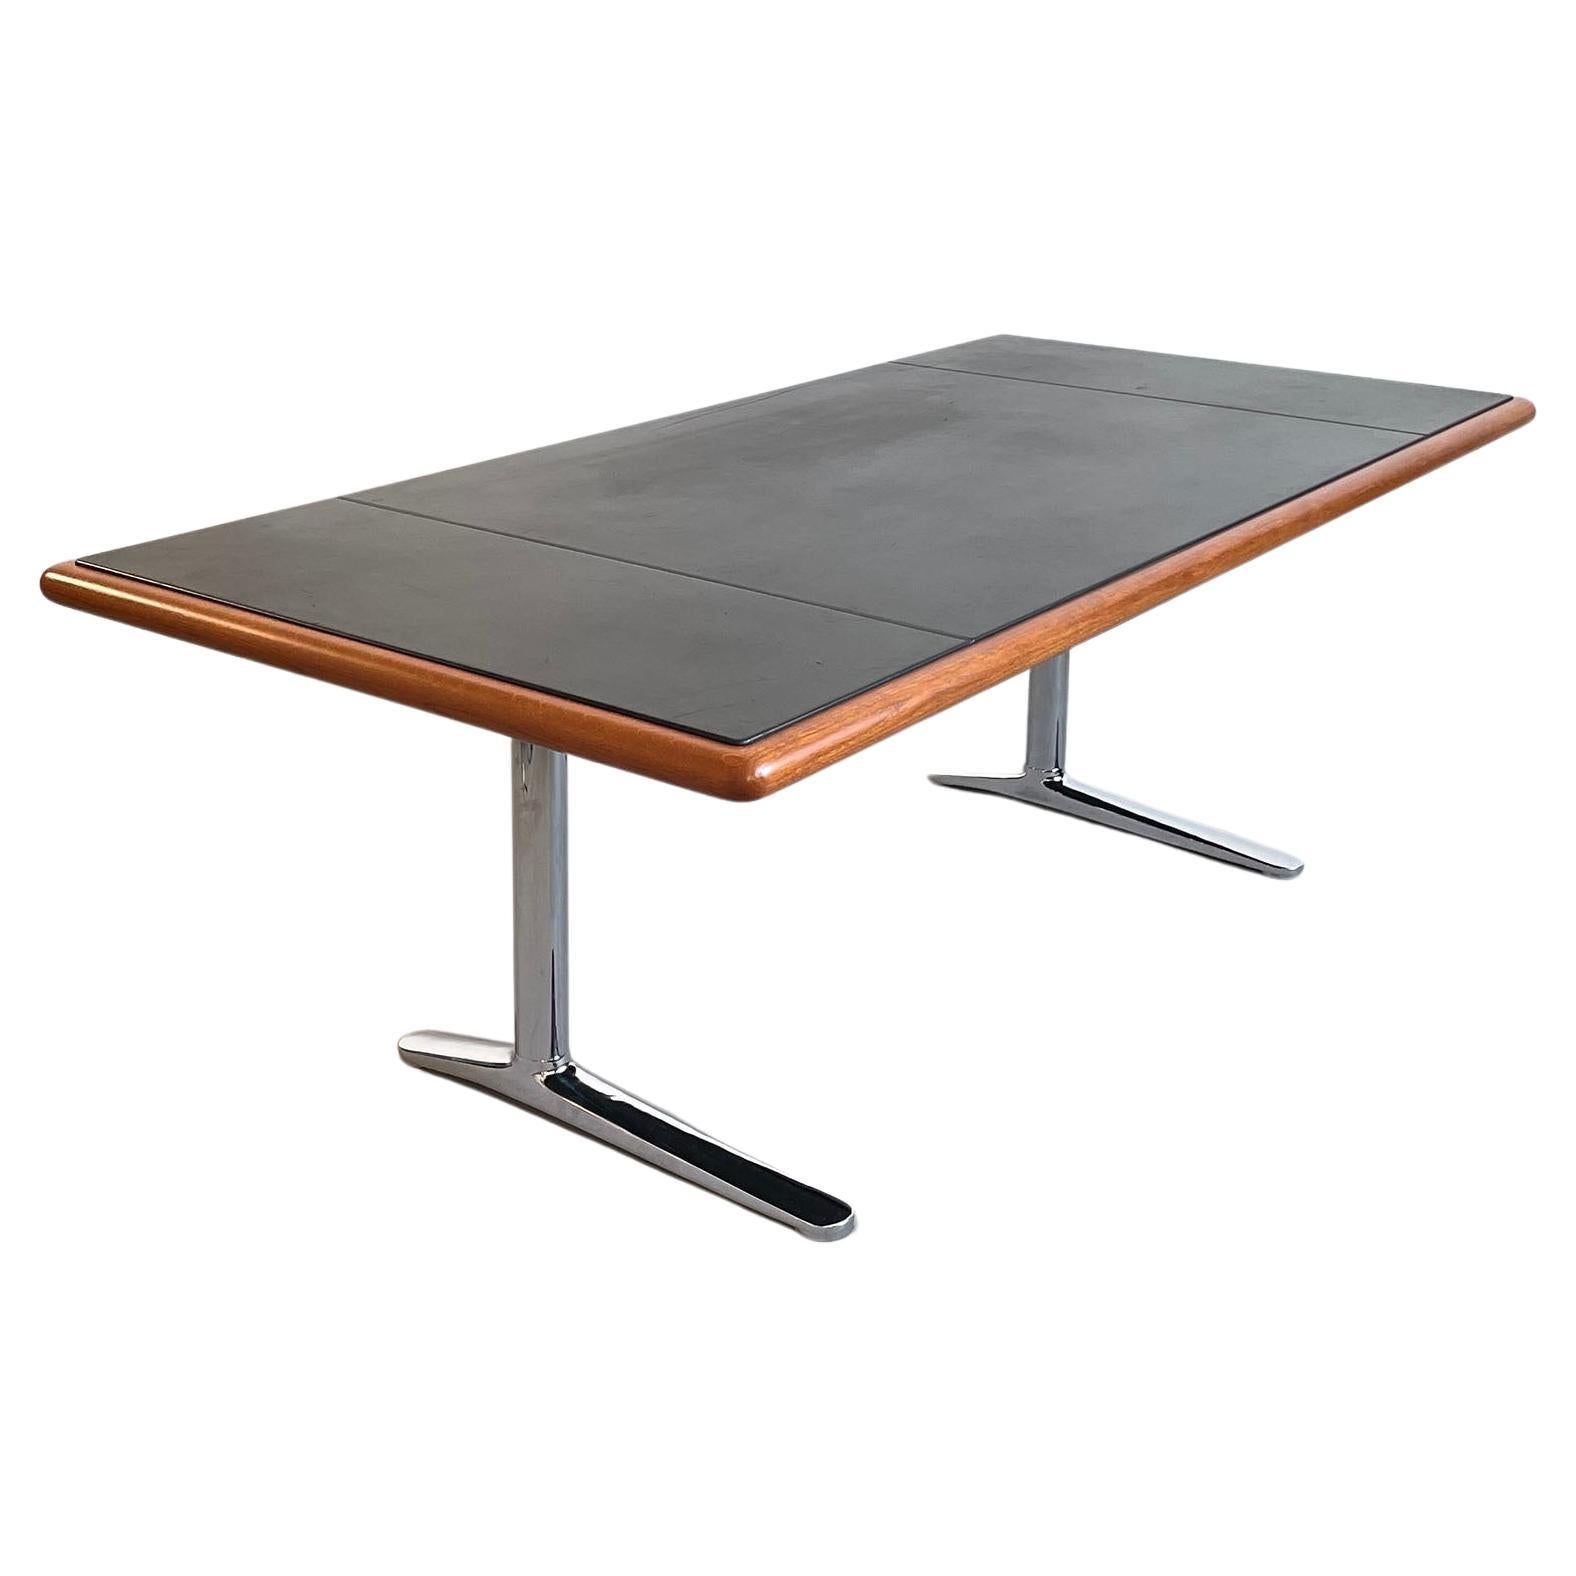 High-end quality minimalist conference desk from the executive collection designed by Warren Platner and manufactured by Knoll International, USA 1973. 

This desk has 2 chrome plated metal legs and a spacious floating desk top made of solid oak